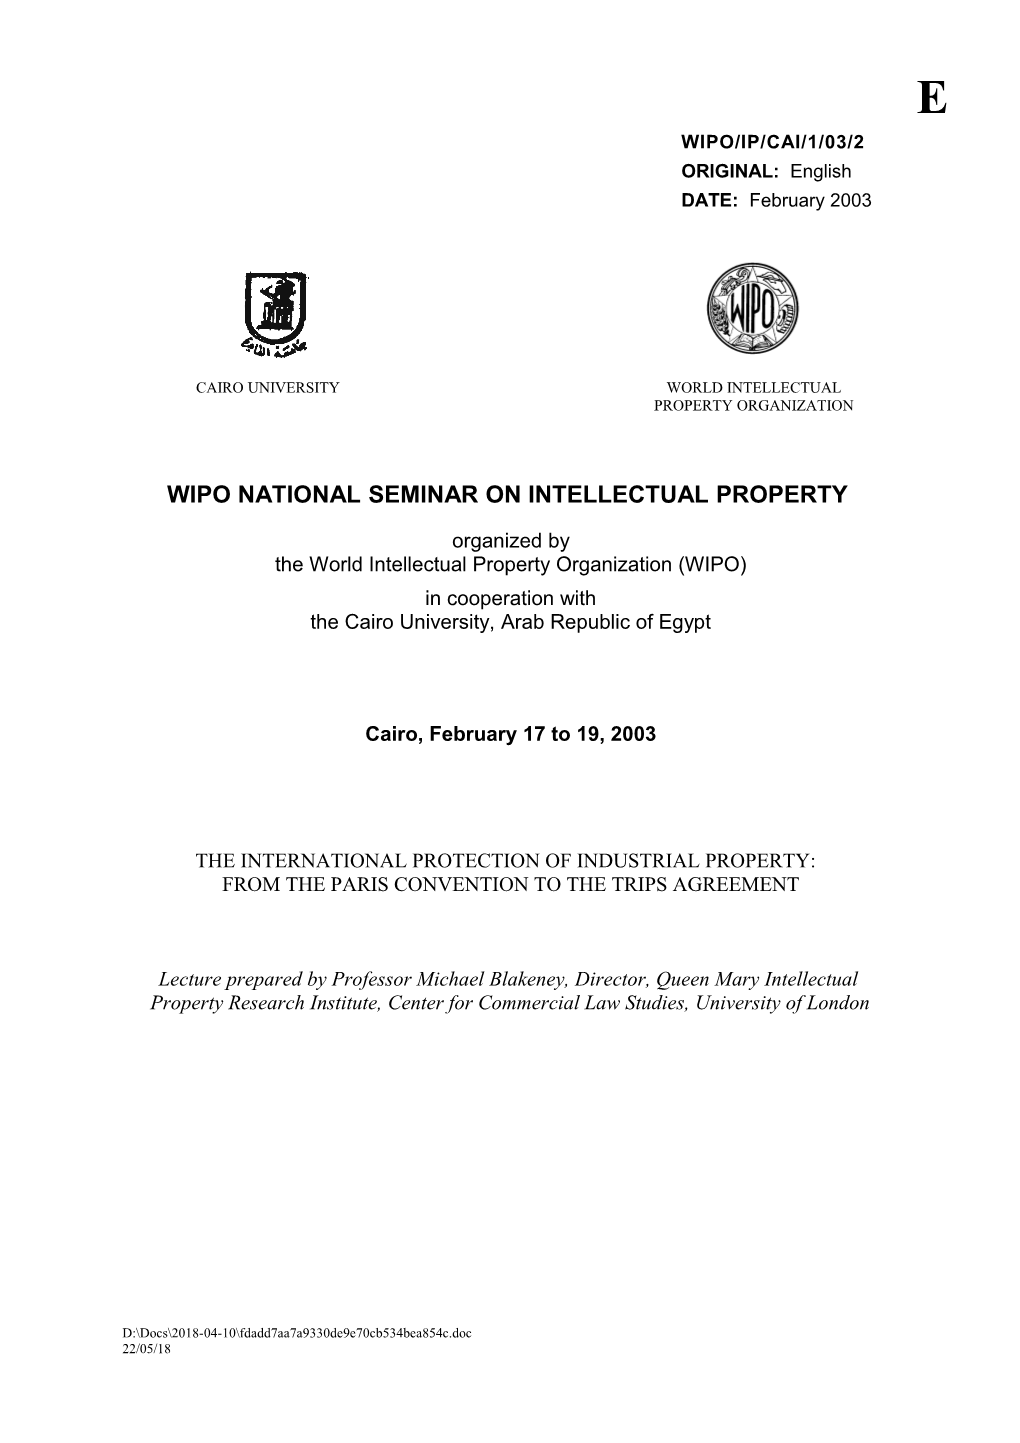 WIPO/IP/CAI/1/03/2: the International Protection of Industrial Property: from the Paris